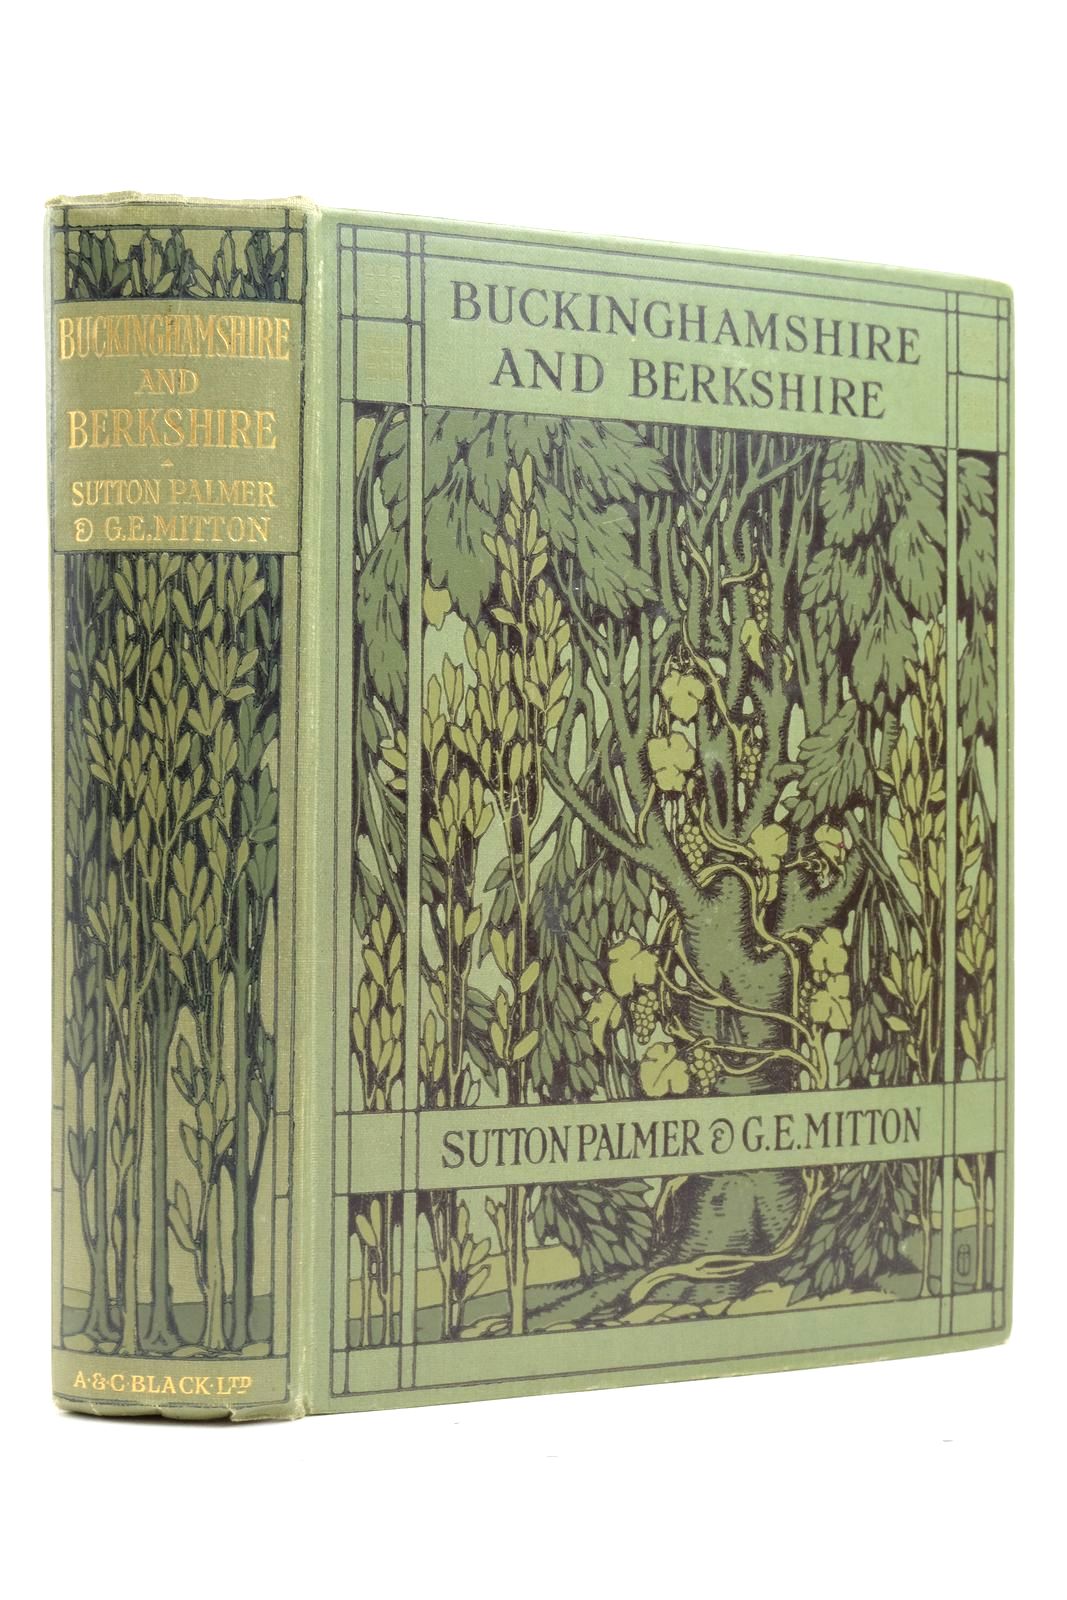 Photo of BUCKINGHAMSHIRE AND BERKSHIRE written by Mitton, G.E. illustrated by Palmer, Sutton published by A. &amp; C. Black Ltd. (STOCK CODE: 2137603)  for sale by Stella & Rose's Books